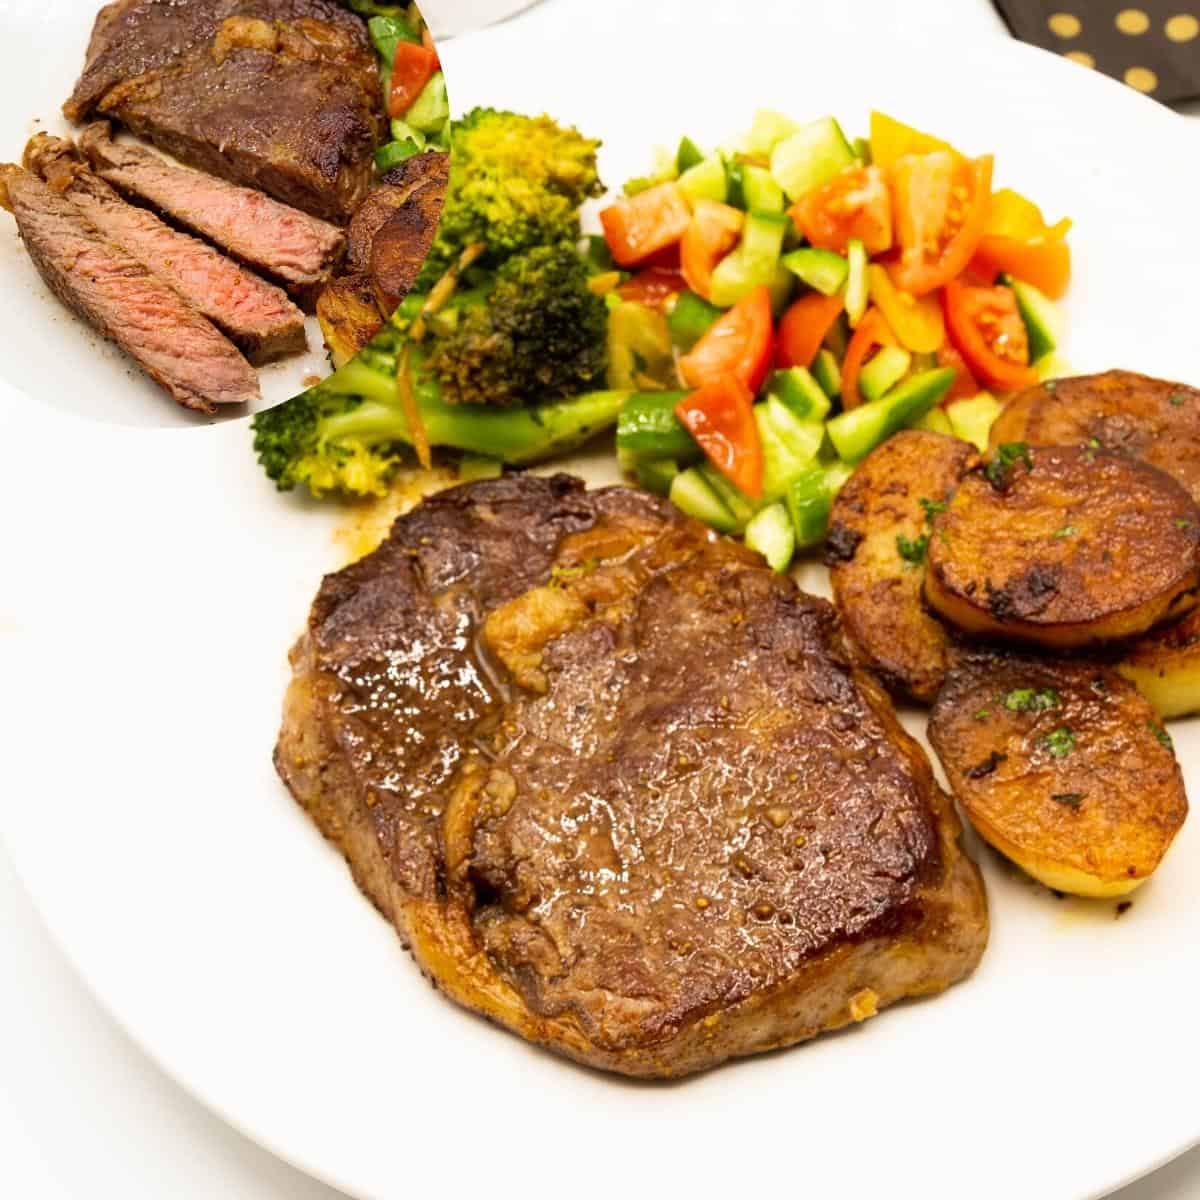 A plate with cooked steak potatoes and salad